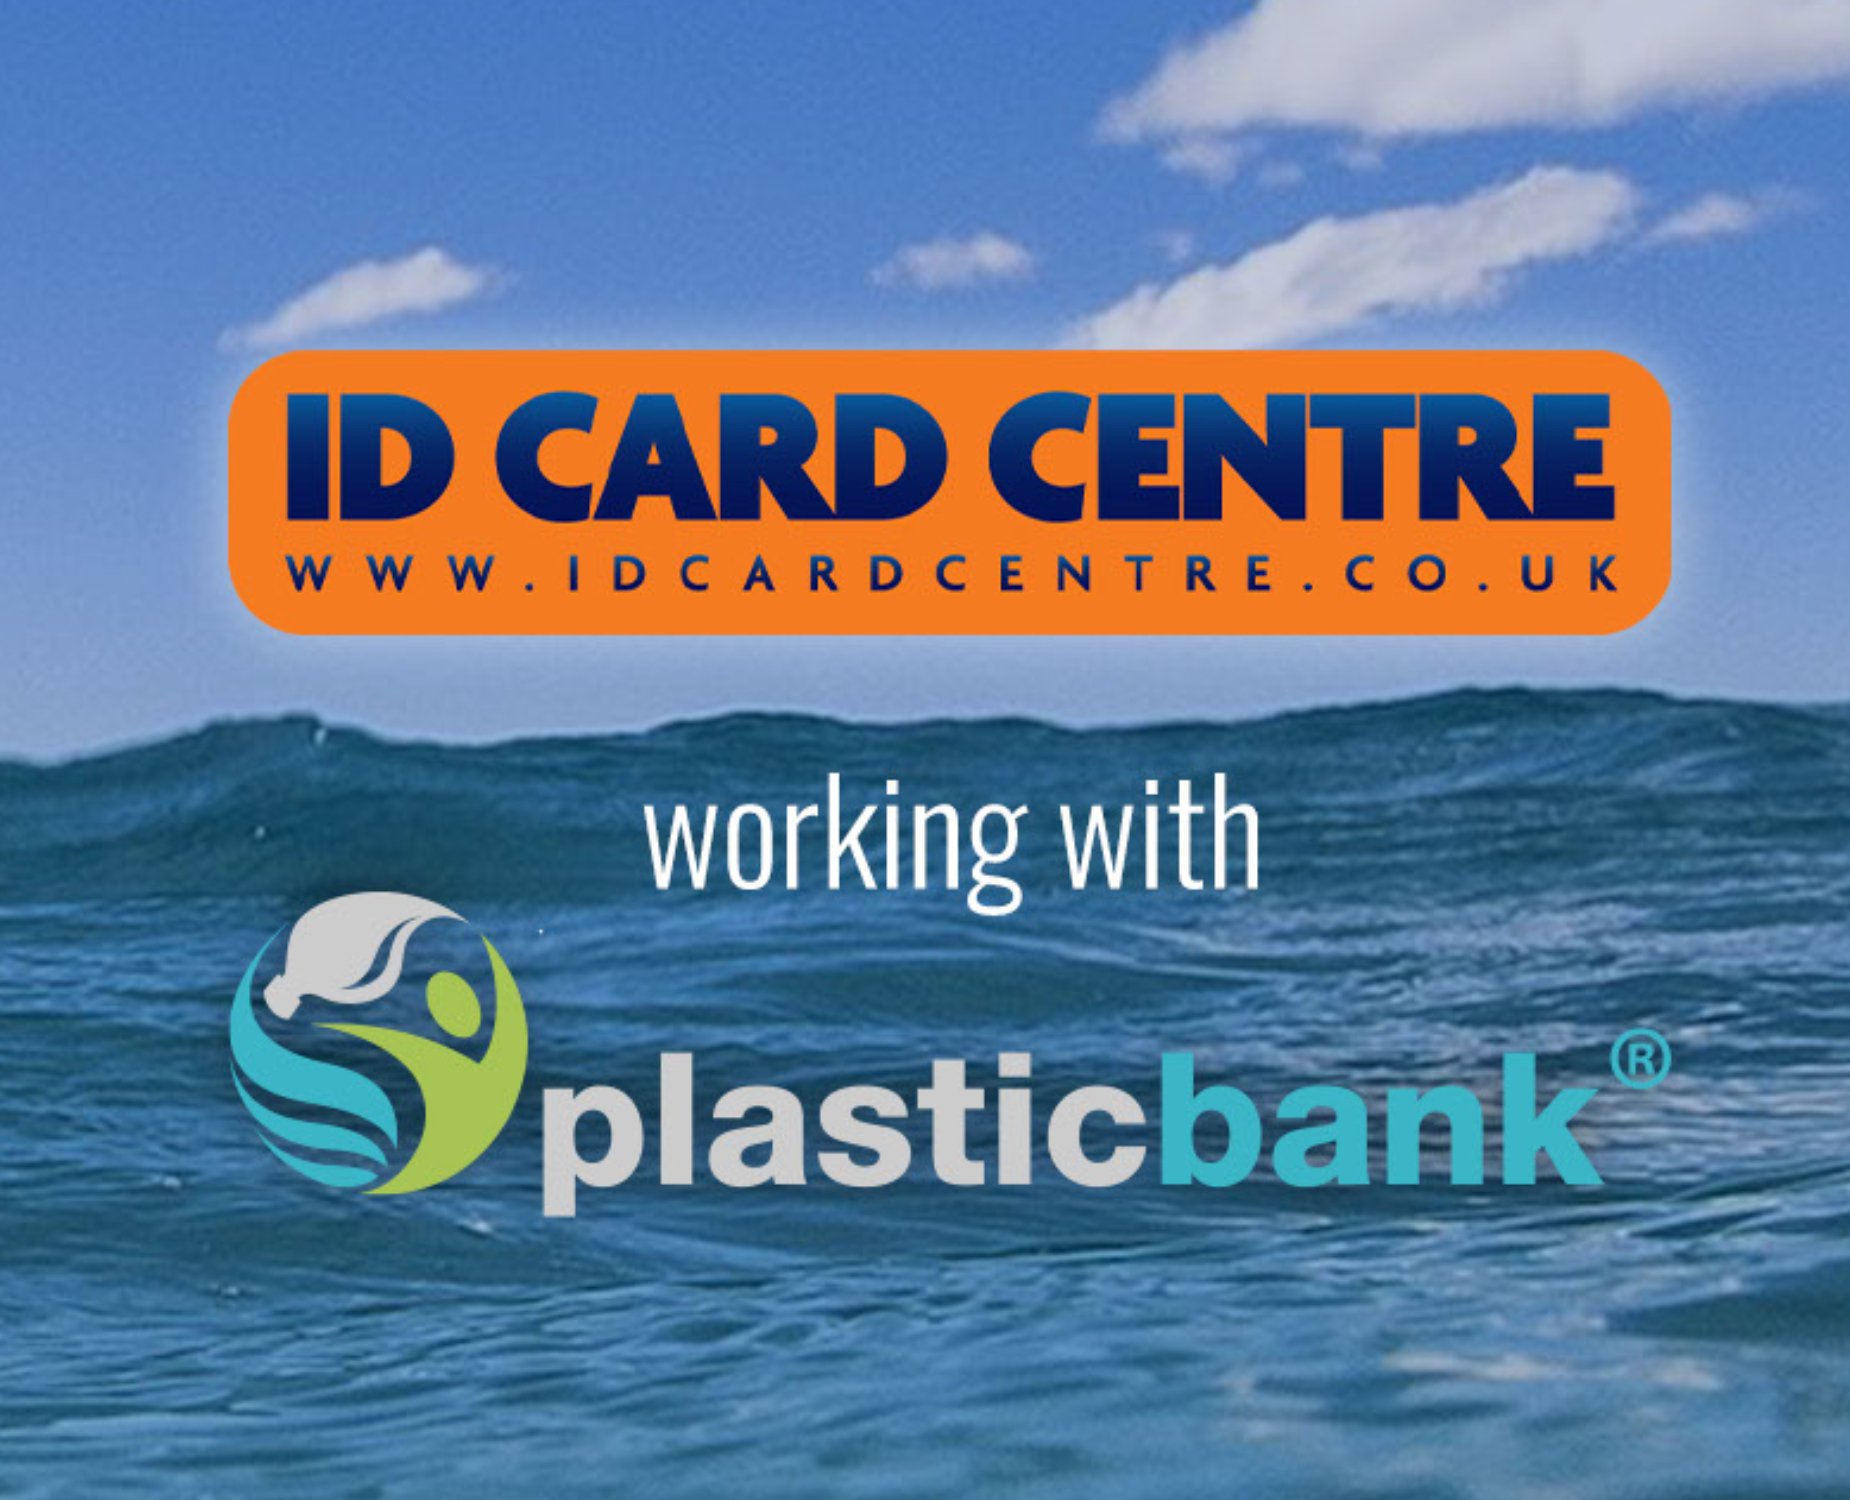 ID Card Centre is working with Plastic Bank